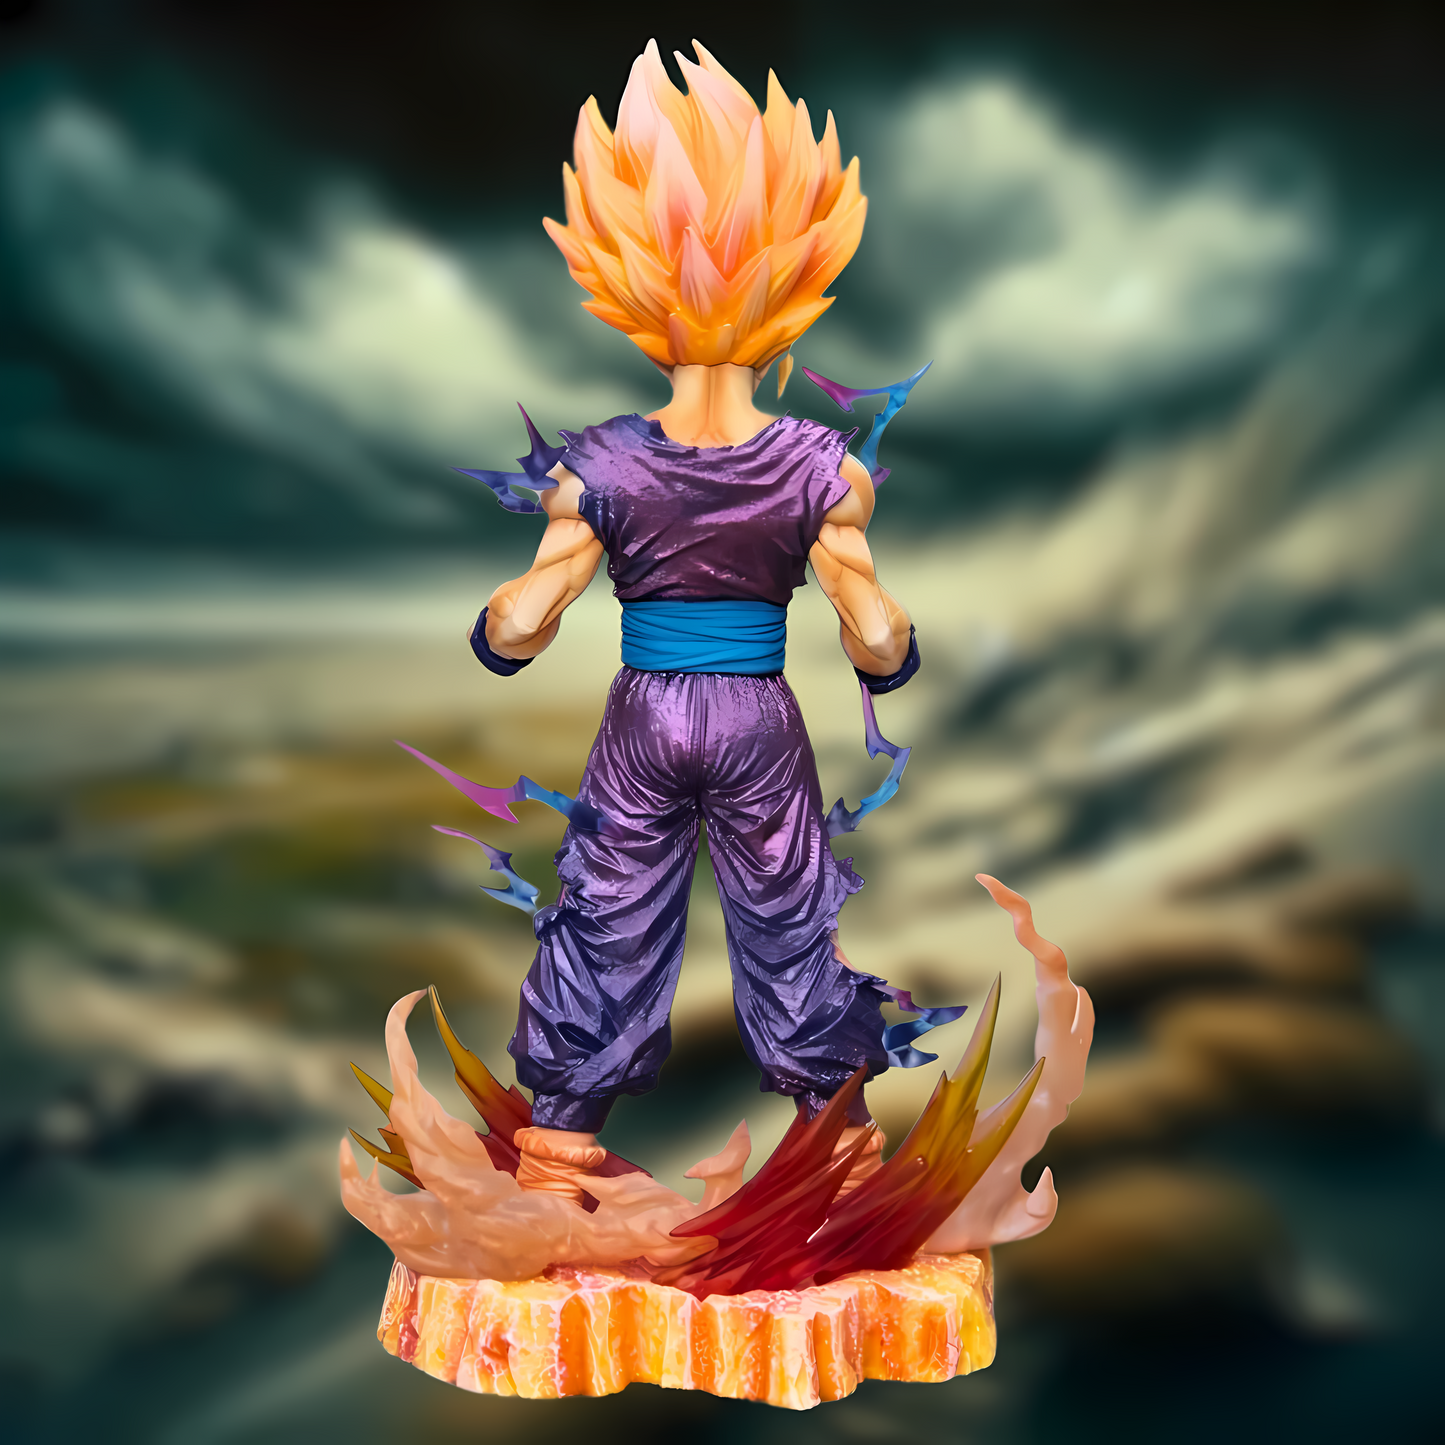 Back view of the Gohan collectible, showcasing his purple outfit and the fiery base detail, with a contrasting turbulent sky in the distance.